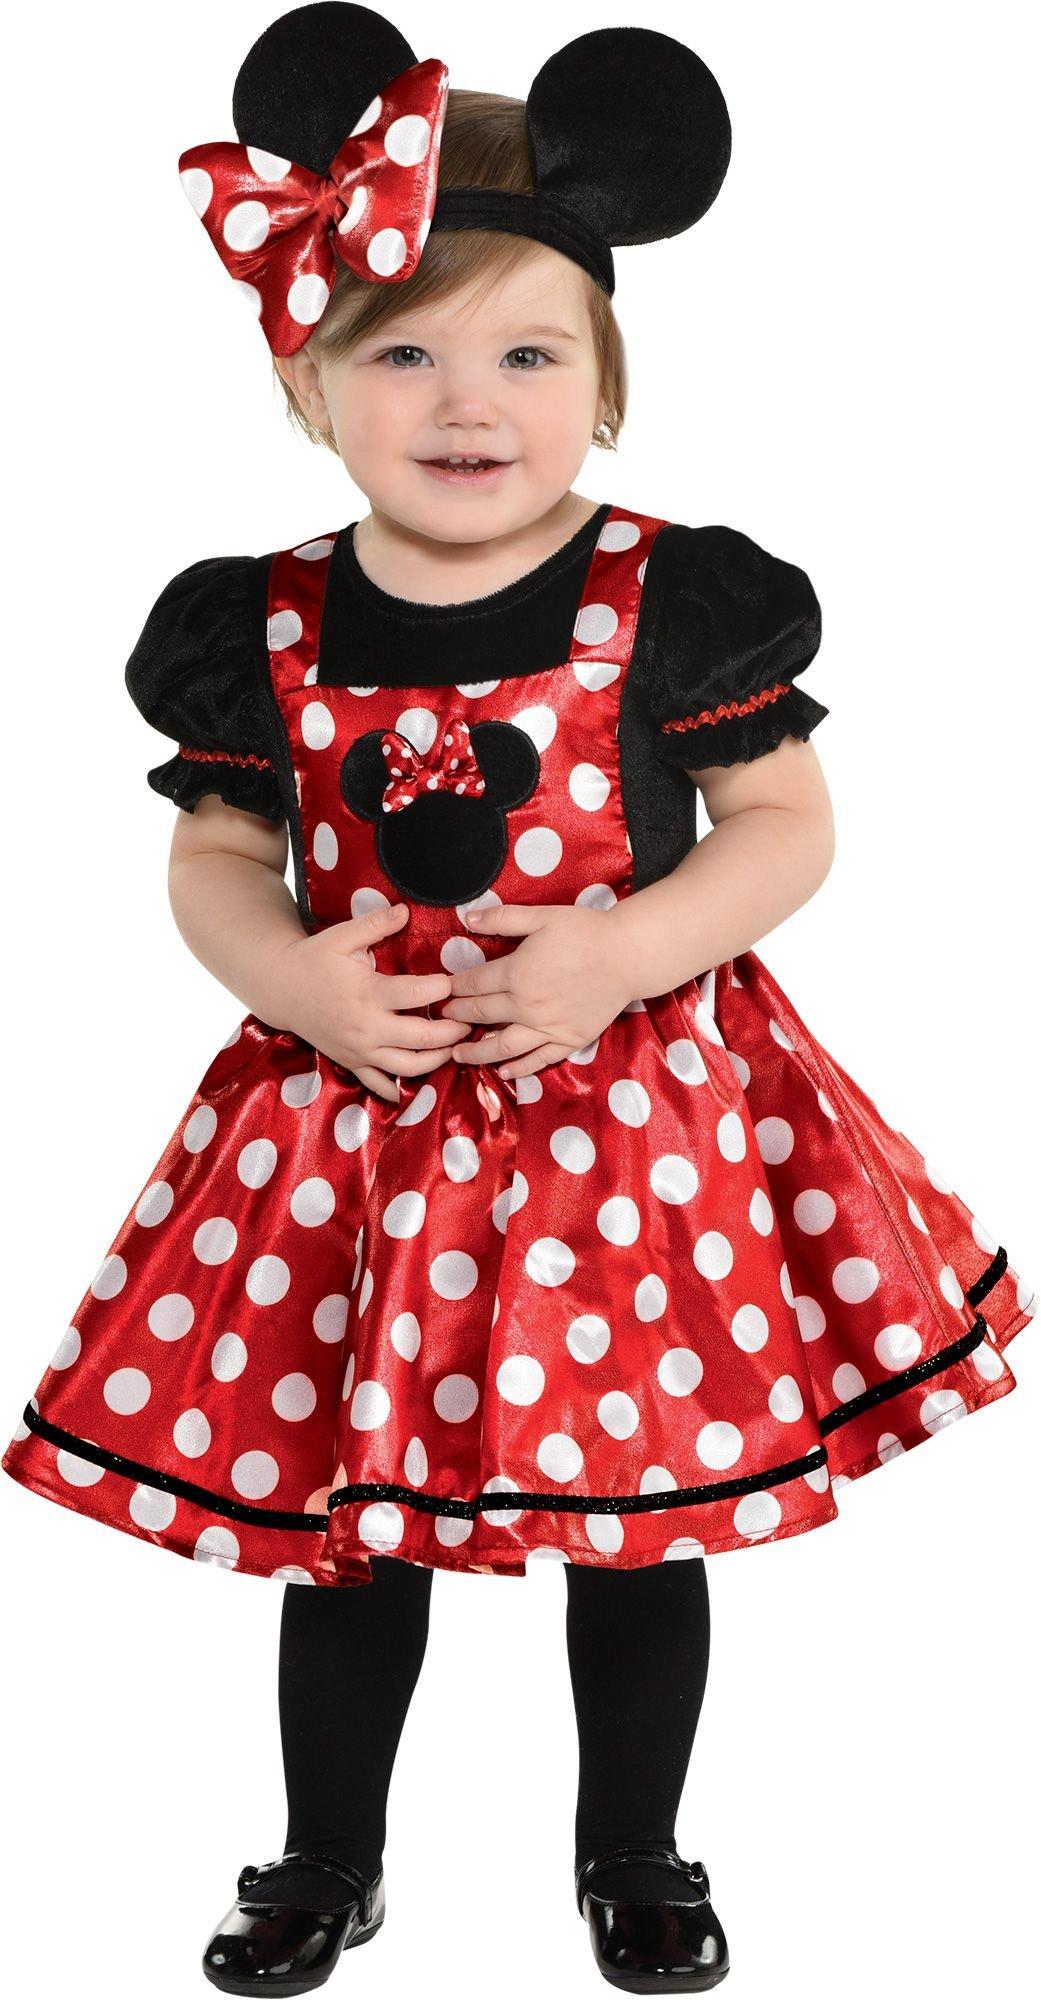 Kids' Red Polka Dot Minnie Mouse Costume - Disney | Party City